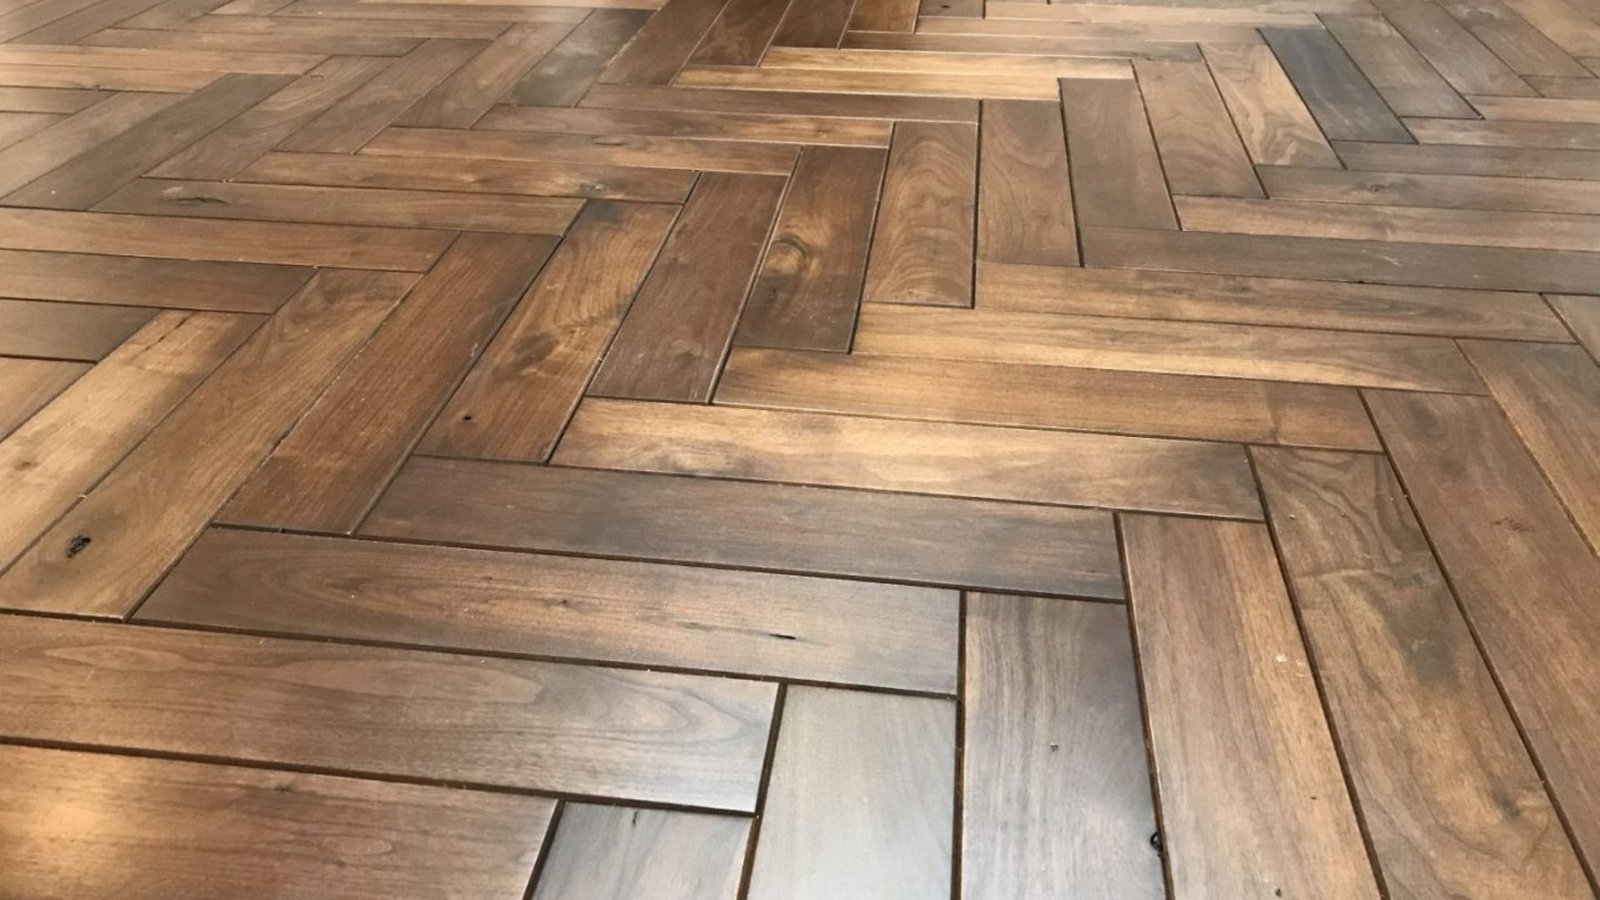 What Are the Benefits of Installing Wooden Parquet Flooring